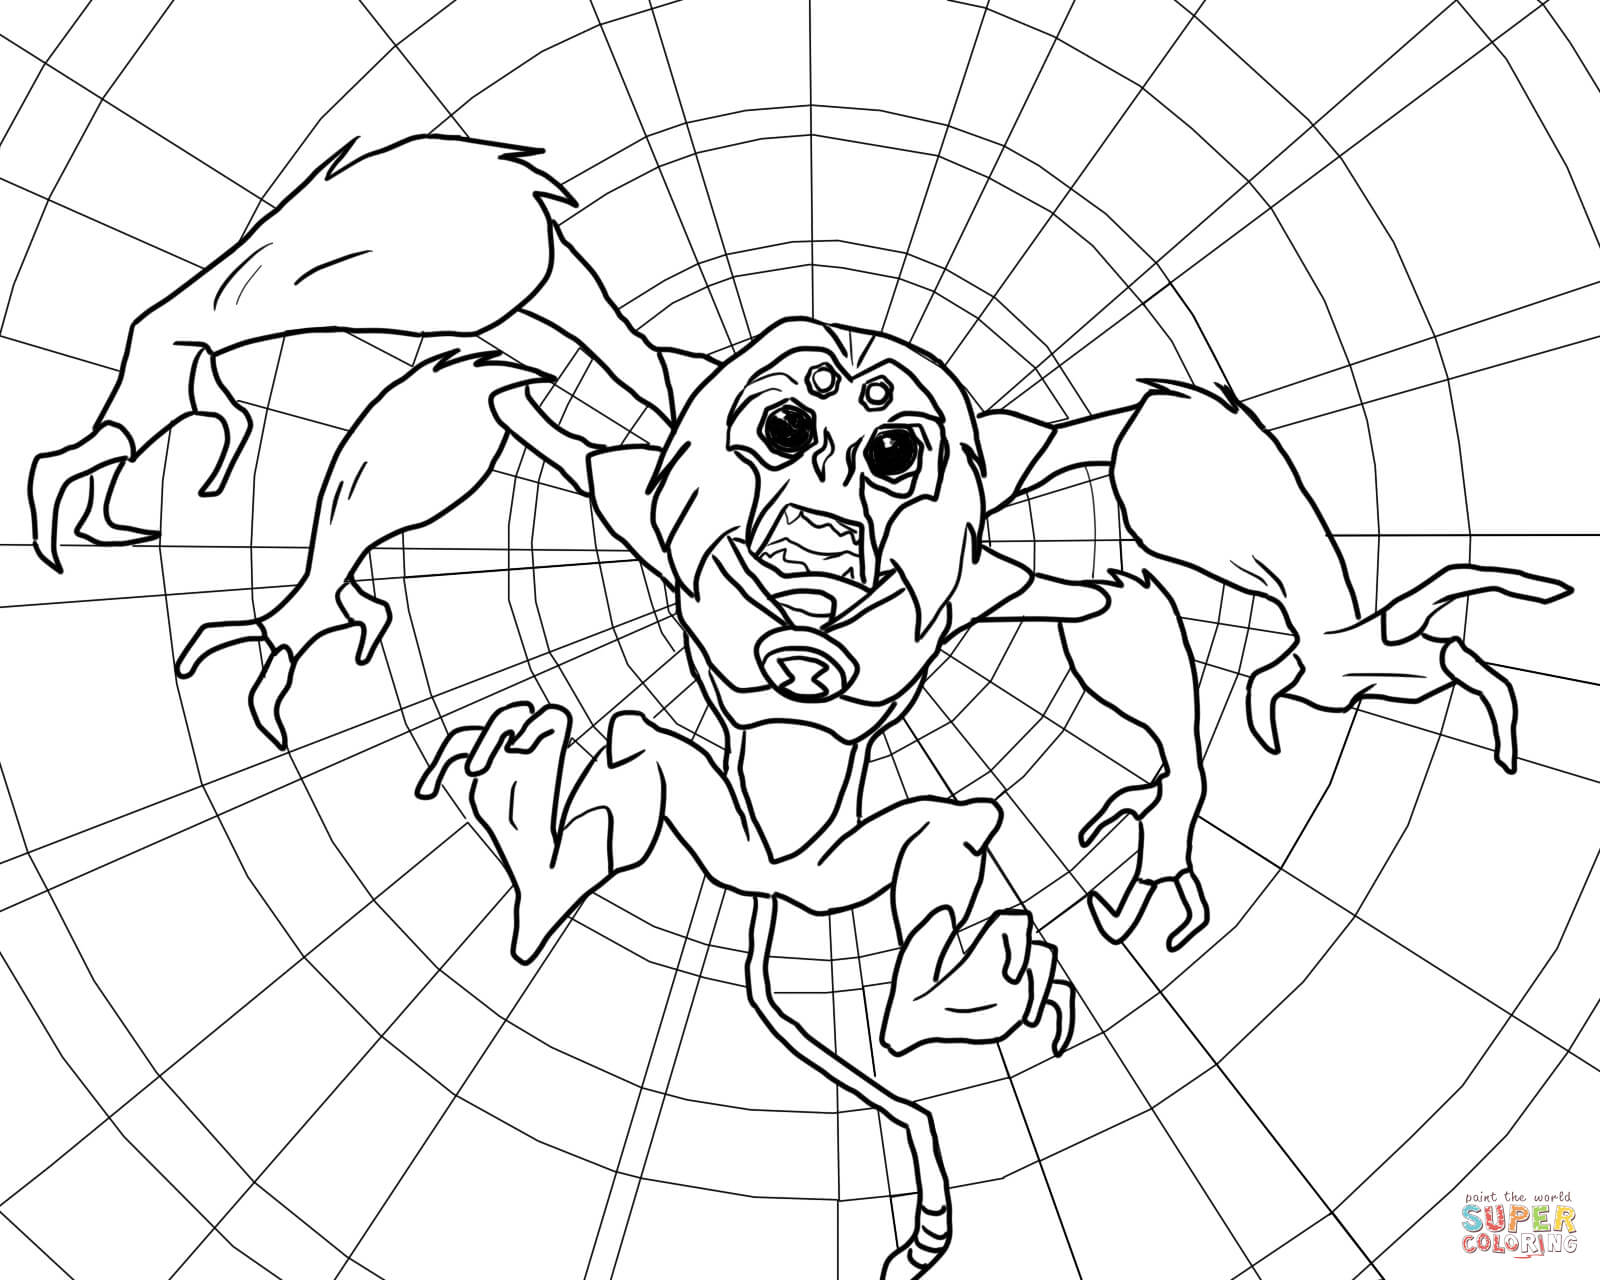 Spider Monkey coloring #16, Download drawings